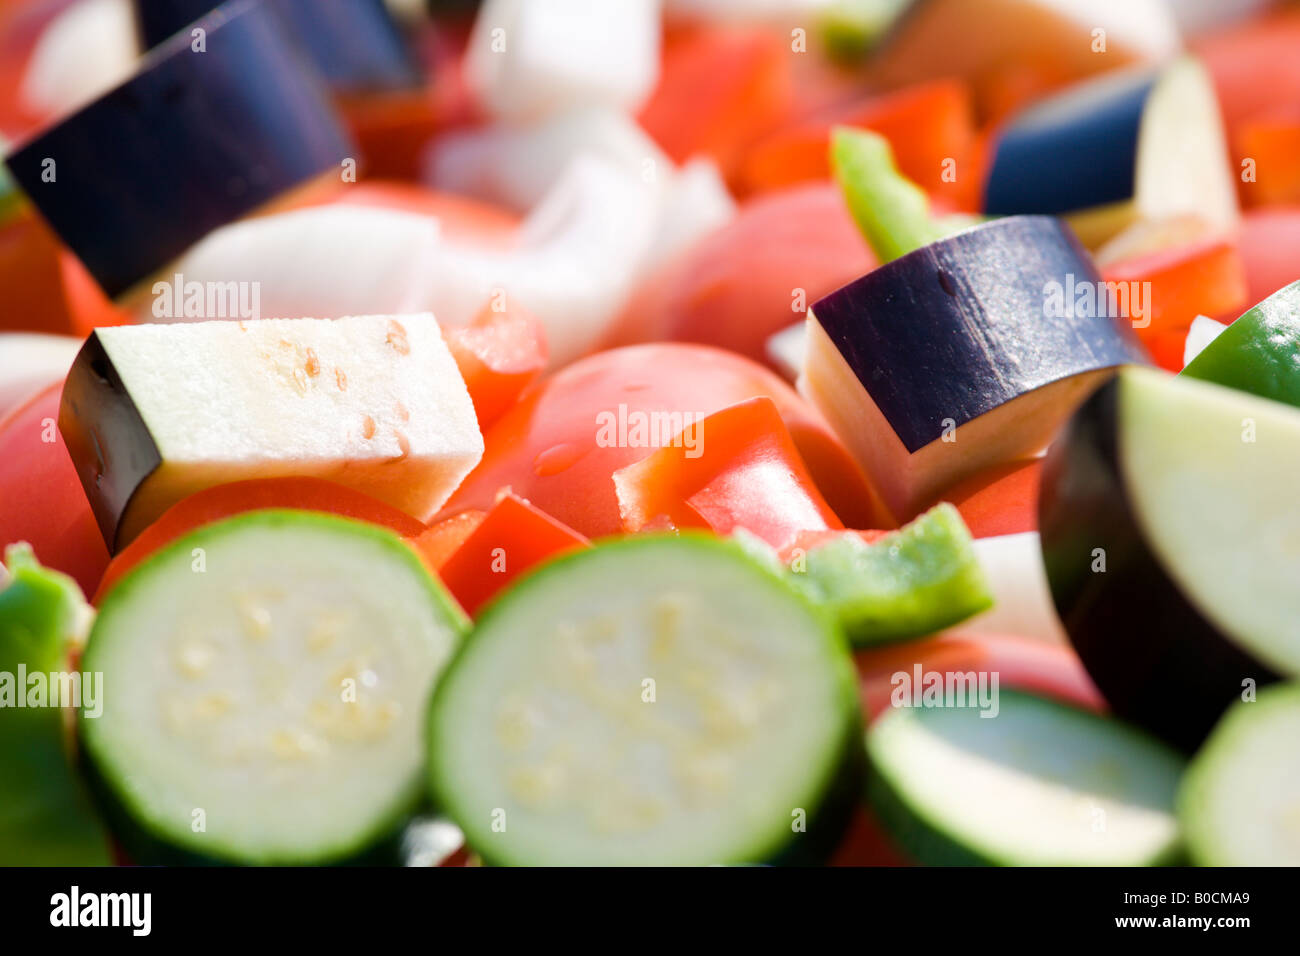 Vegetables for cooking Stock Photo